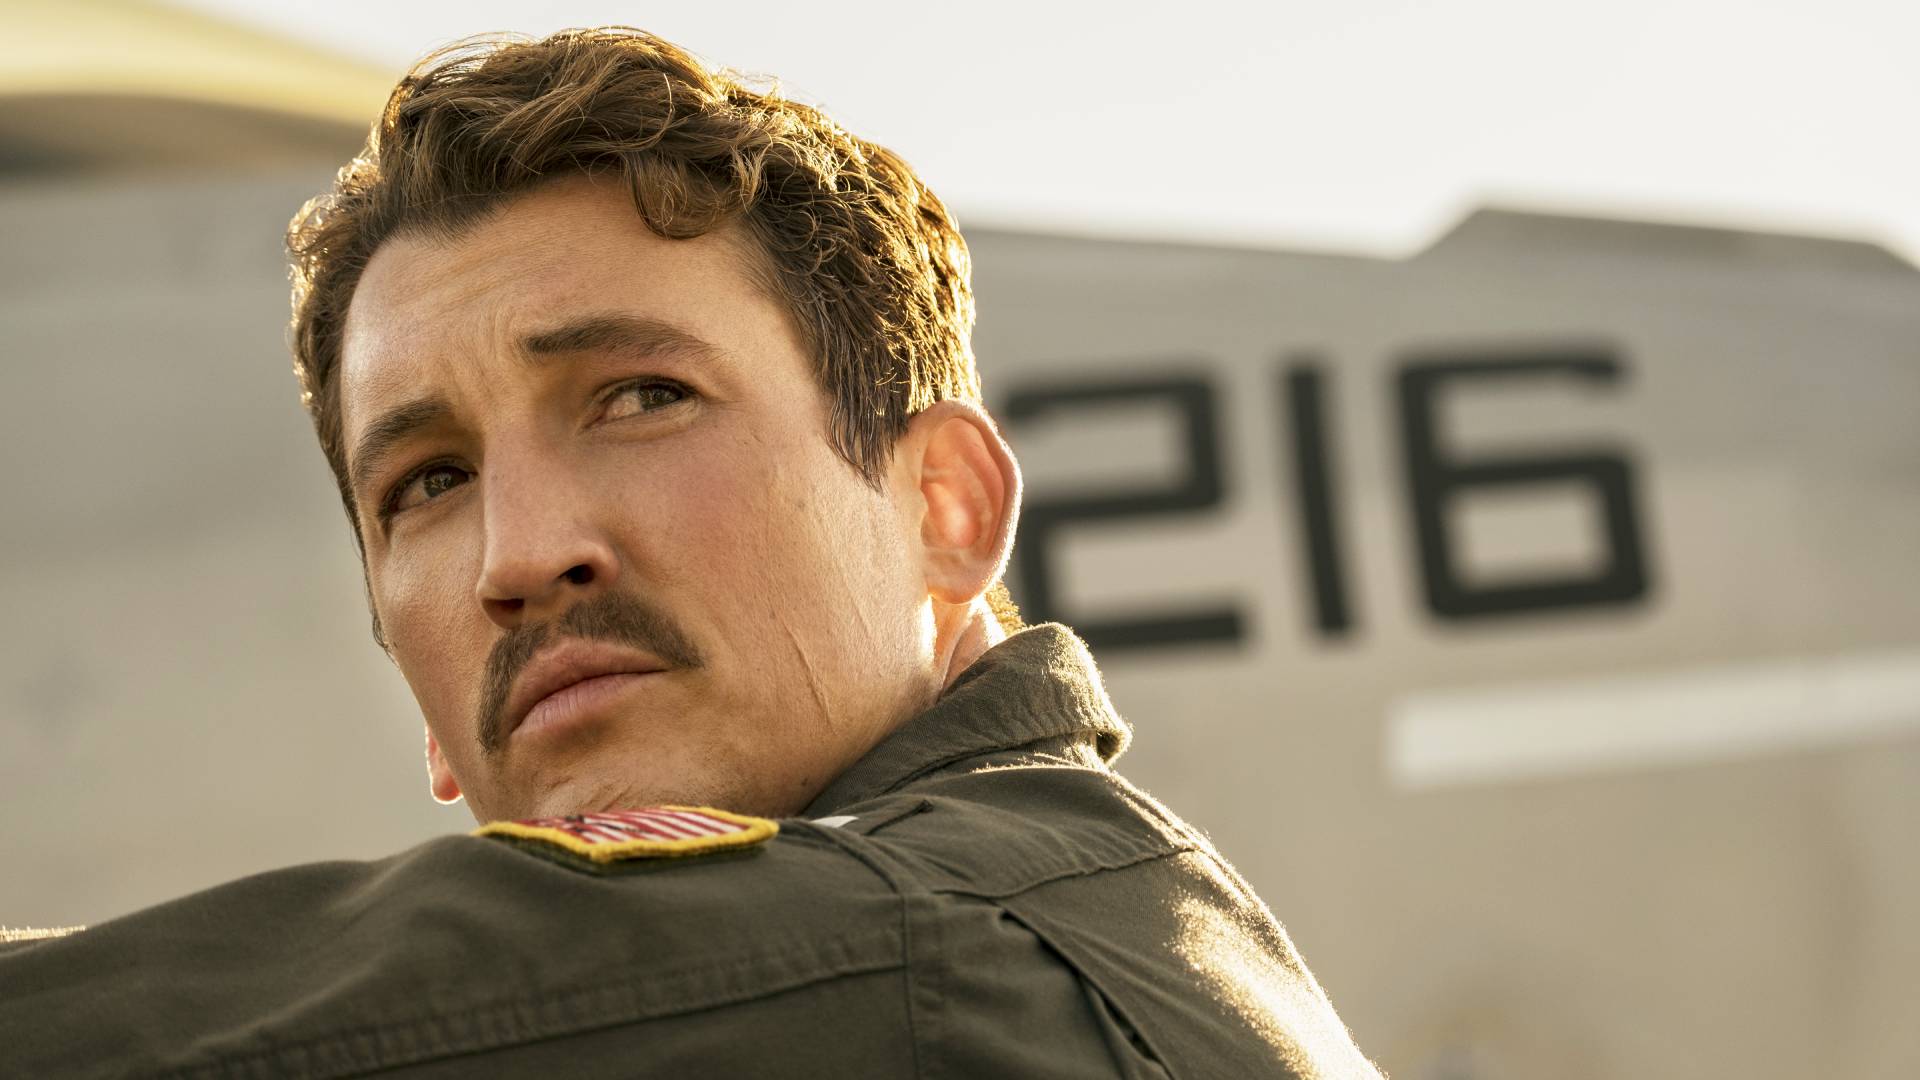 Miles Teller opens up on what it’s like to go toe-to-toe with Tom Cruise on Top Gun: Maverick